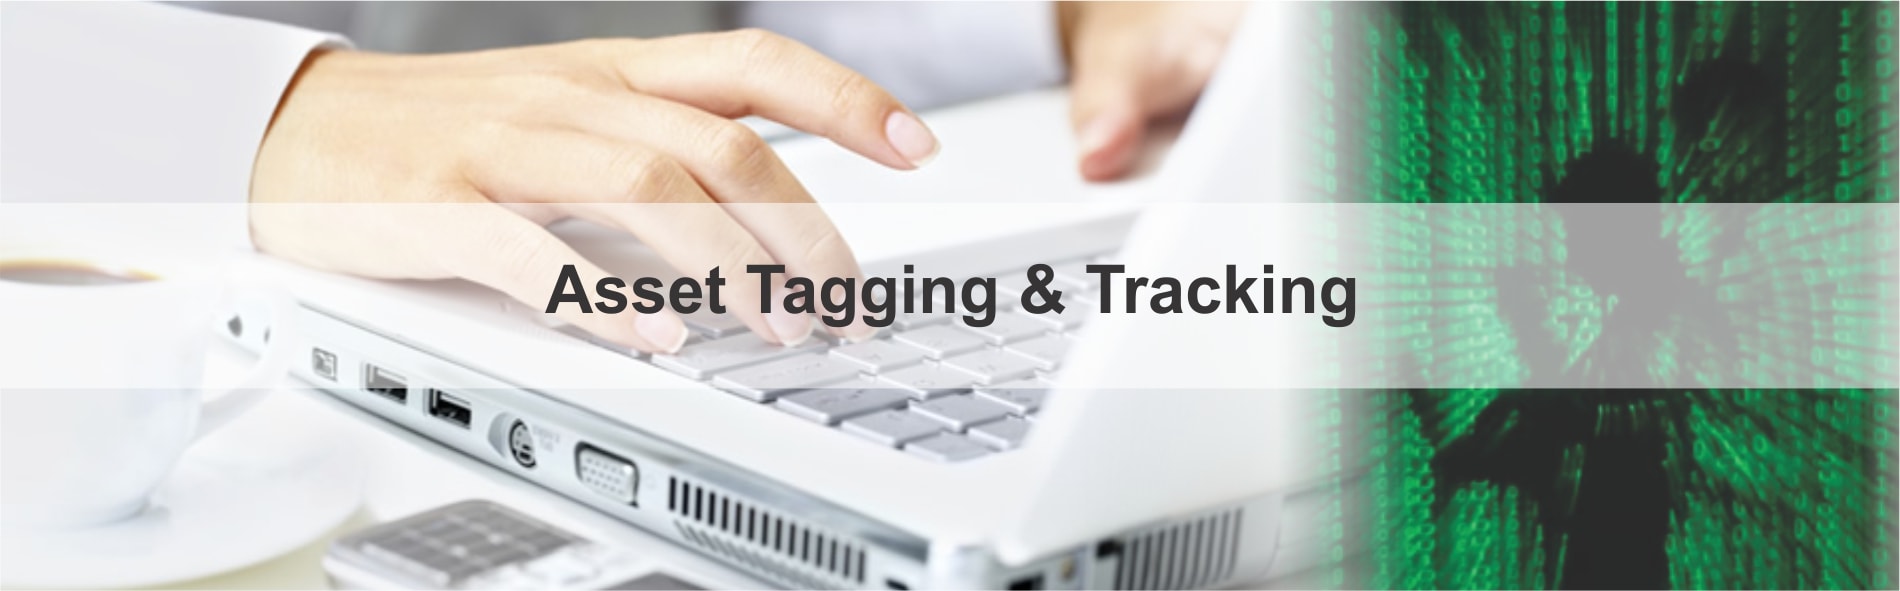 Asset Tagging & Tracking